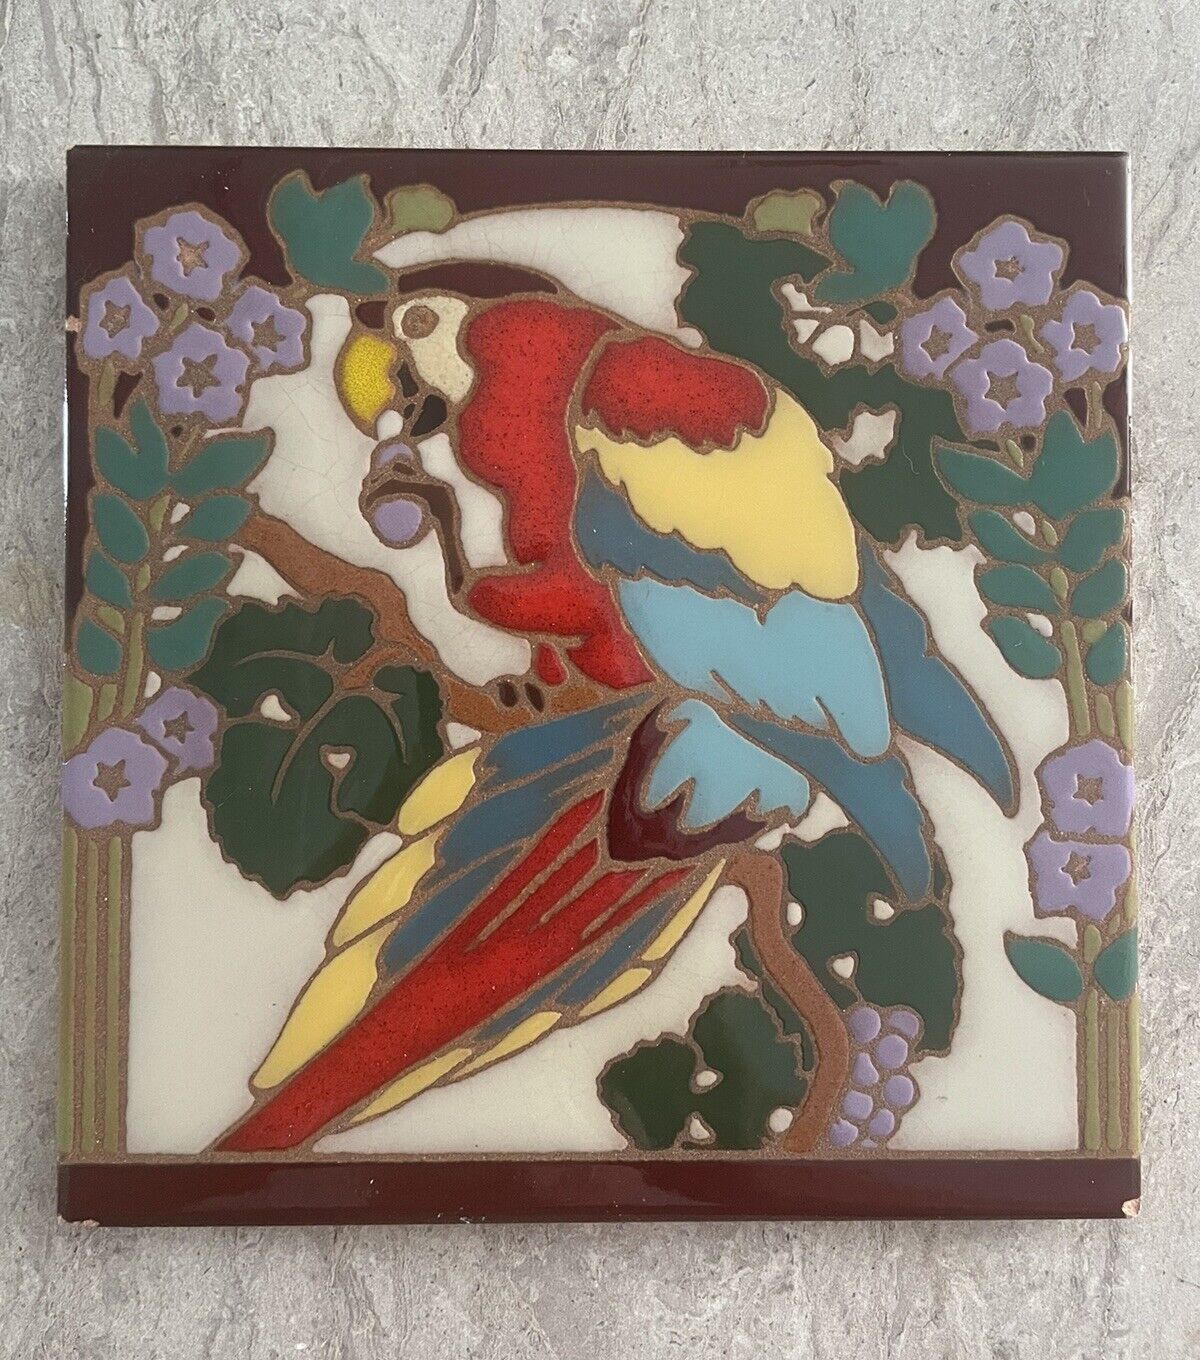 Vintage Tile Trivet Hand Painted Made In Italy 8x8 Colorful Parrot